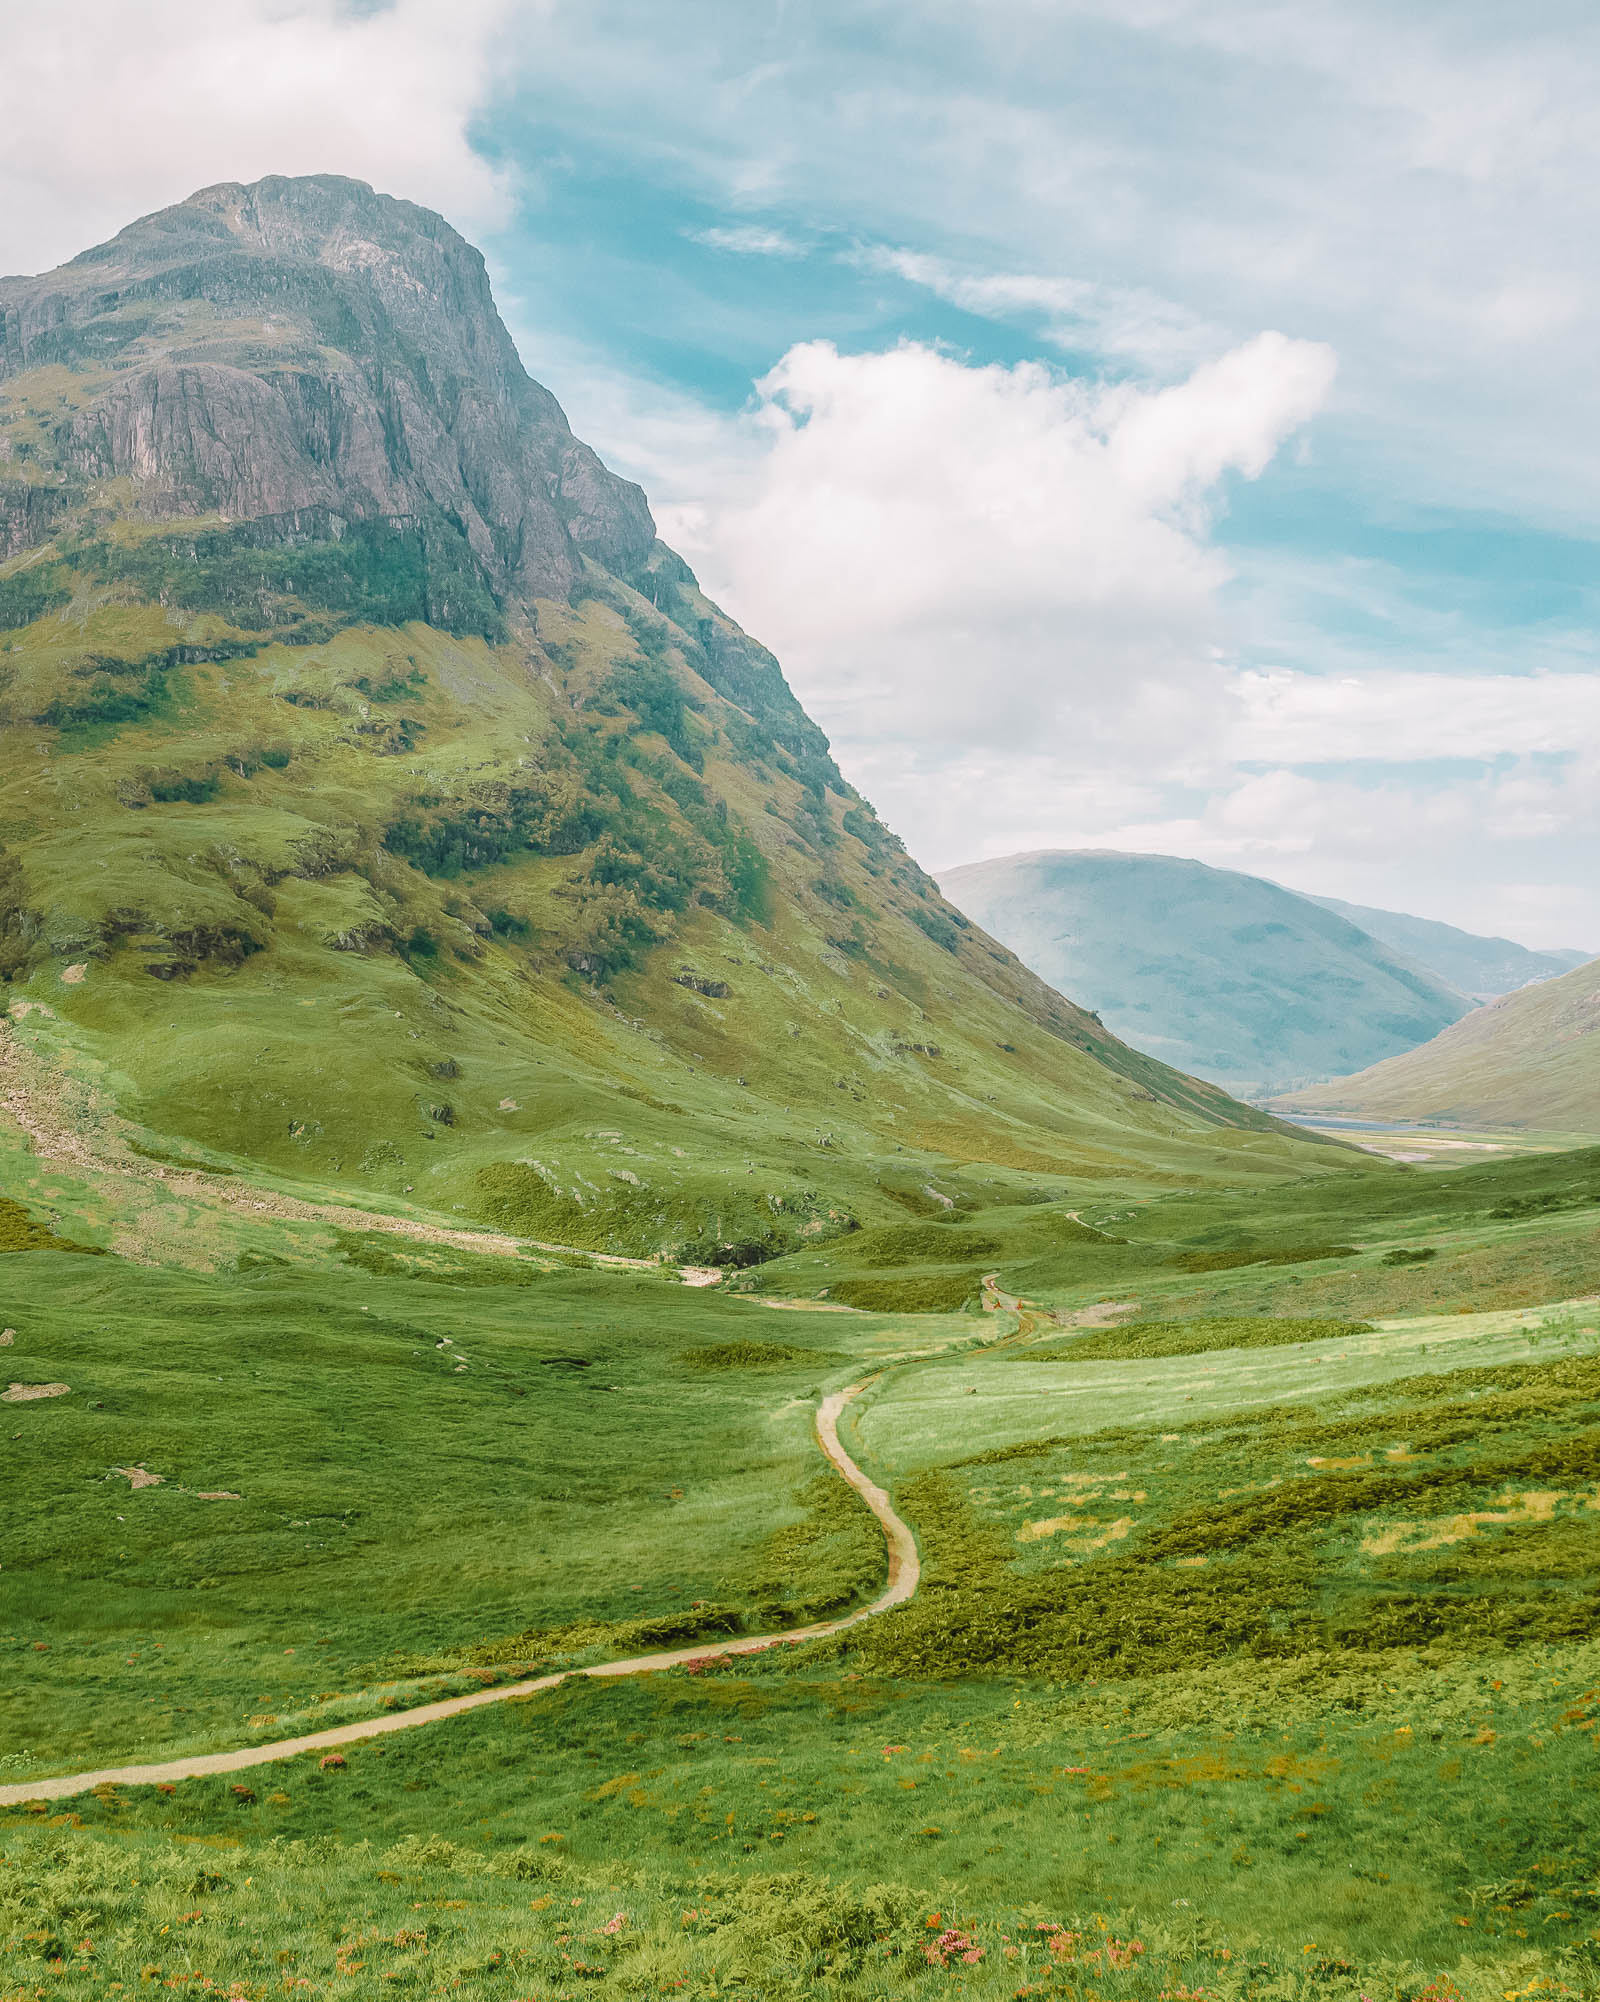 The Scottish Highlands: Best Things To Do On A Road Trip